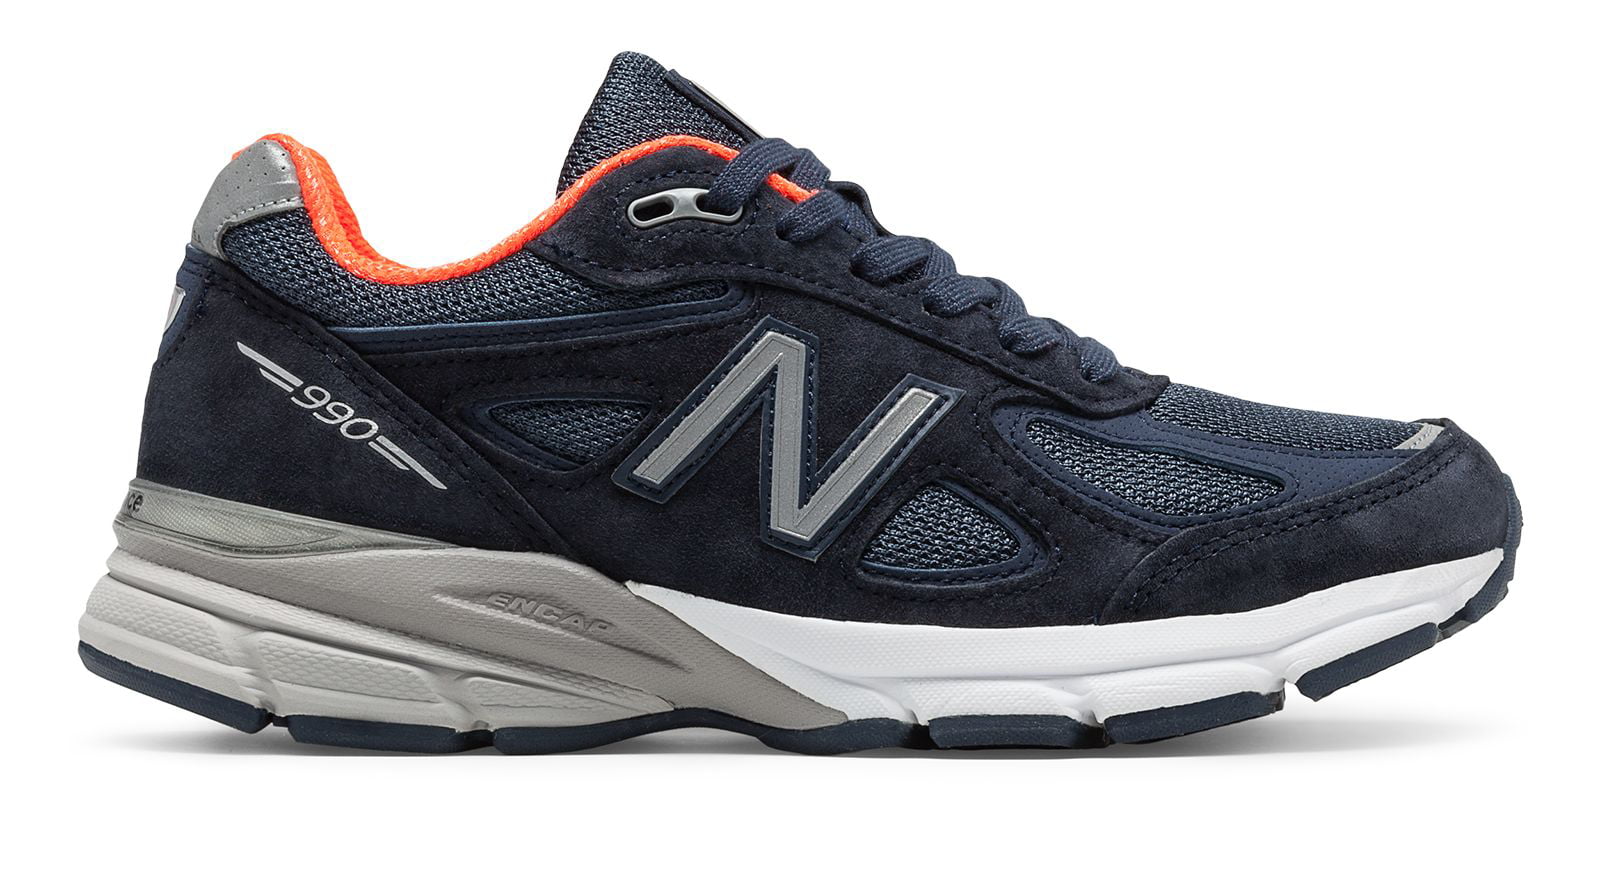 New Balance Women's Made in US Shoes Navy with Orange - Walmart.com